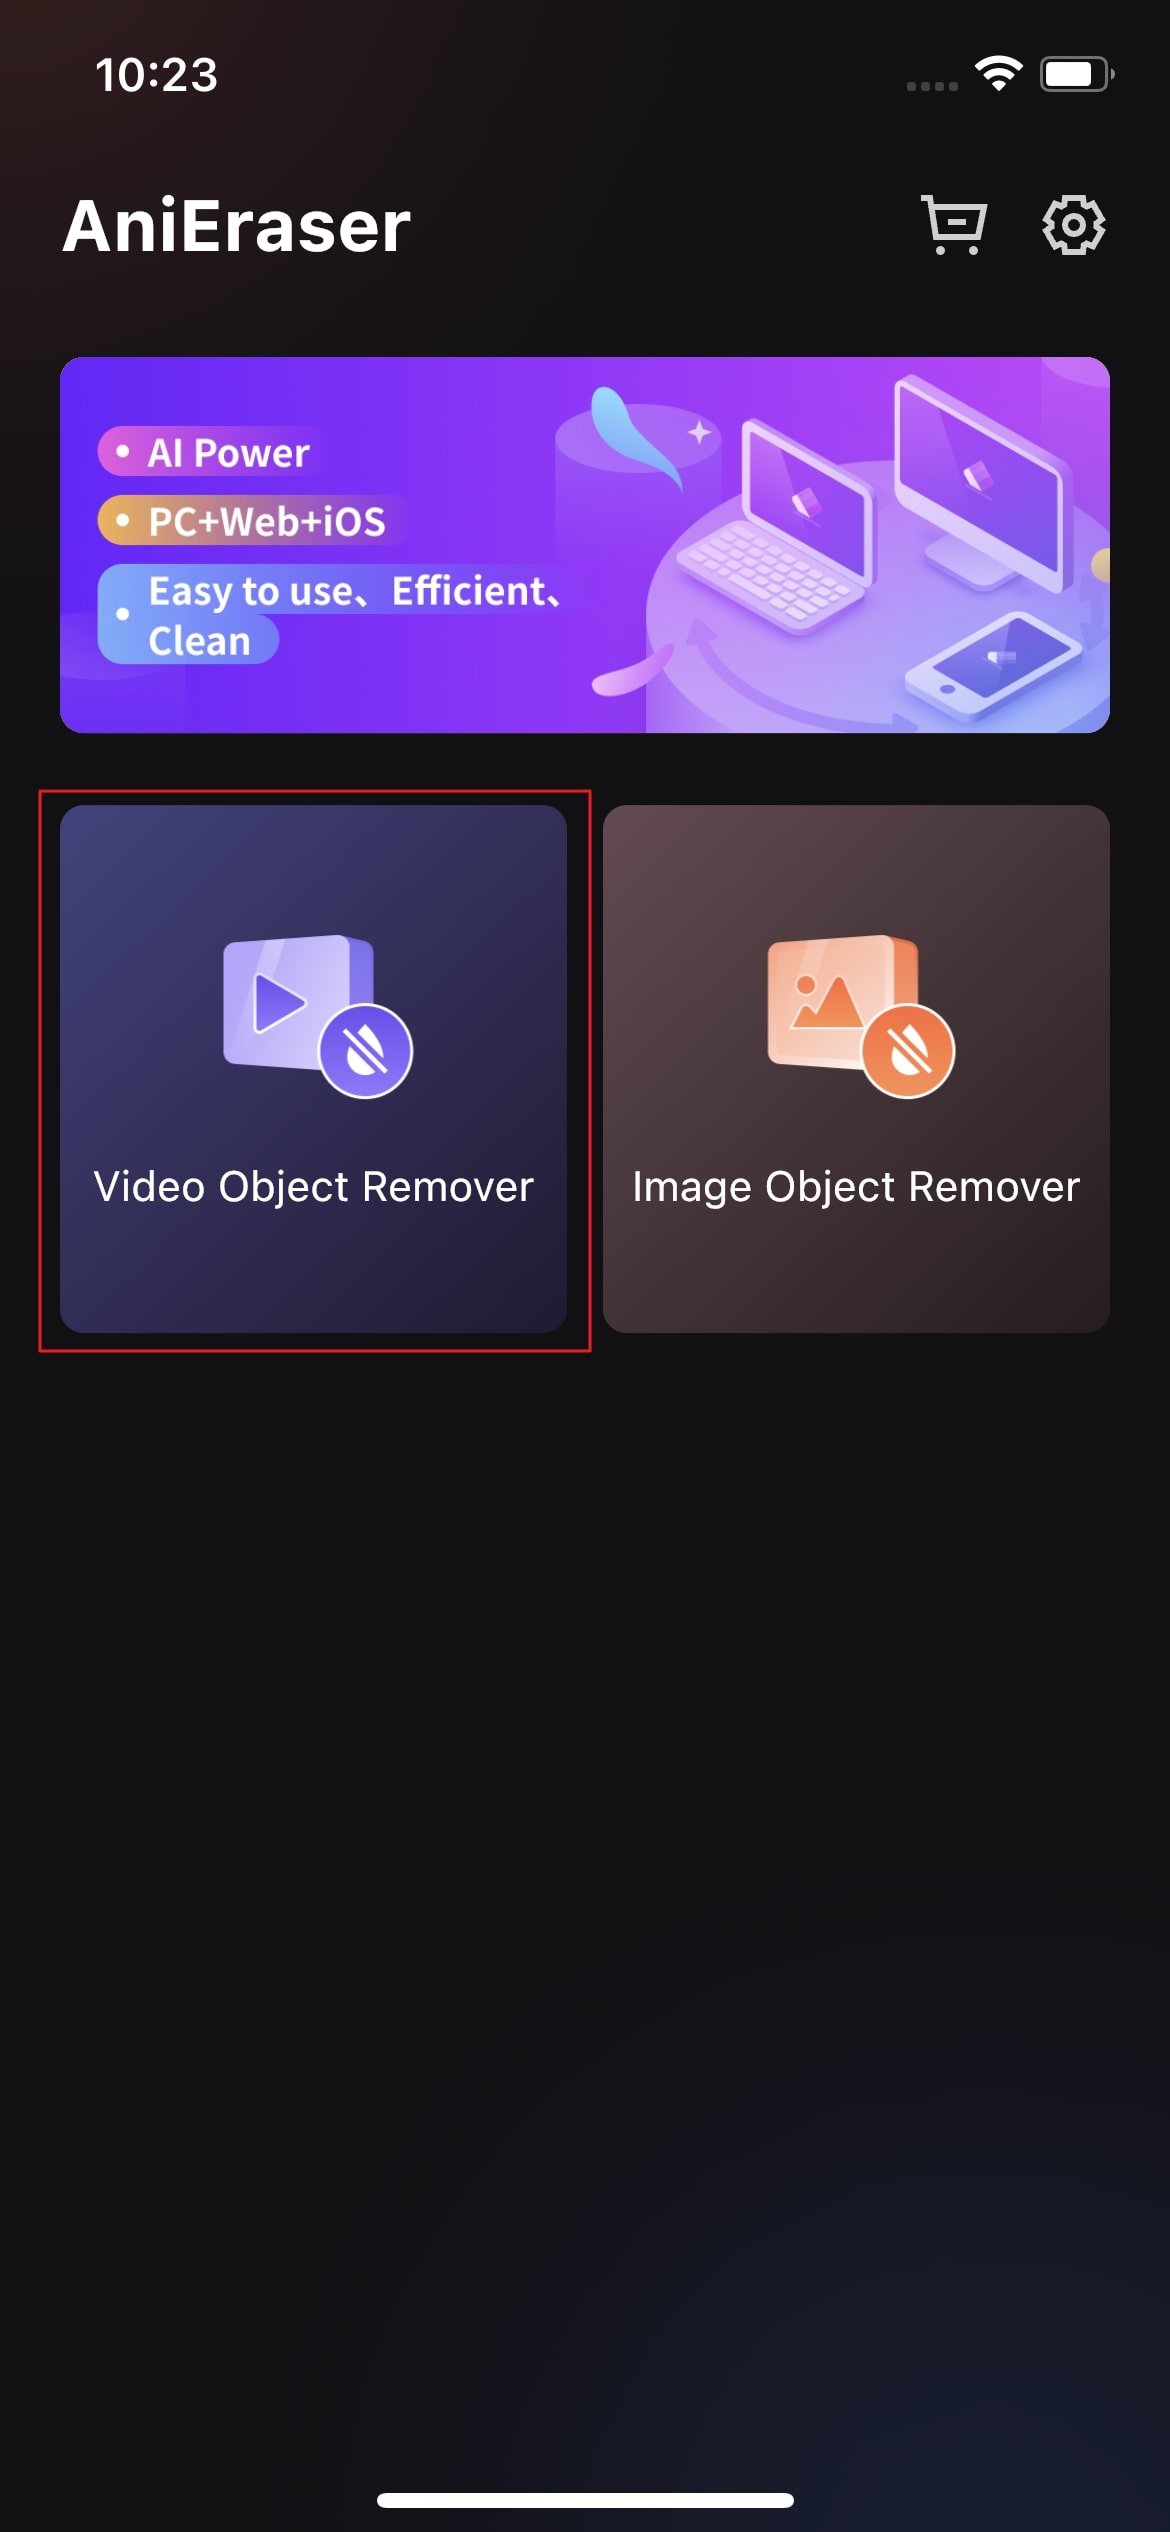 tap on video object remover